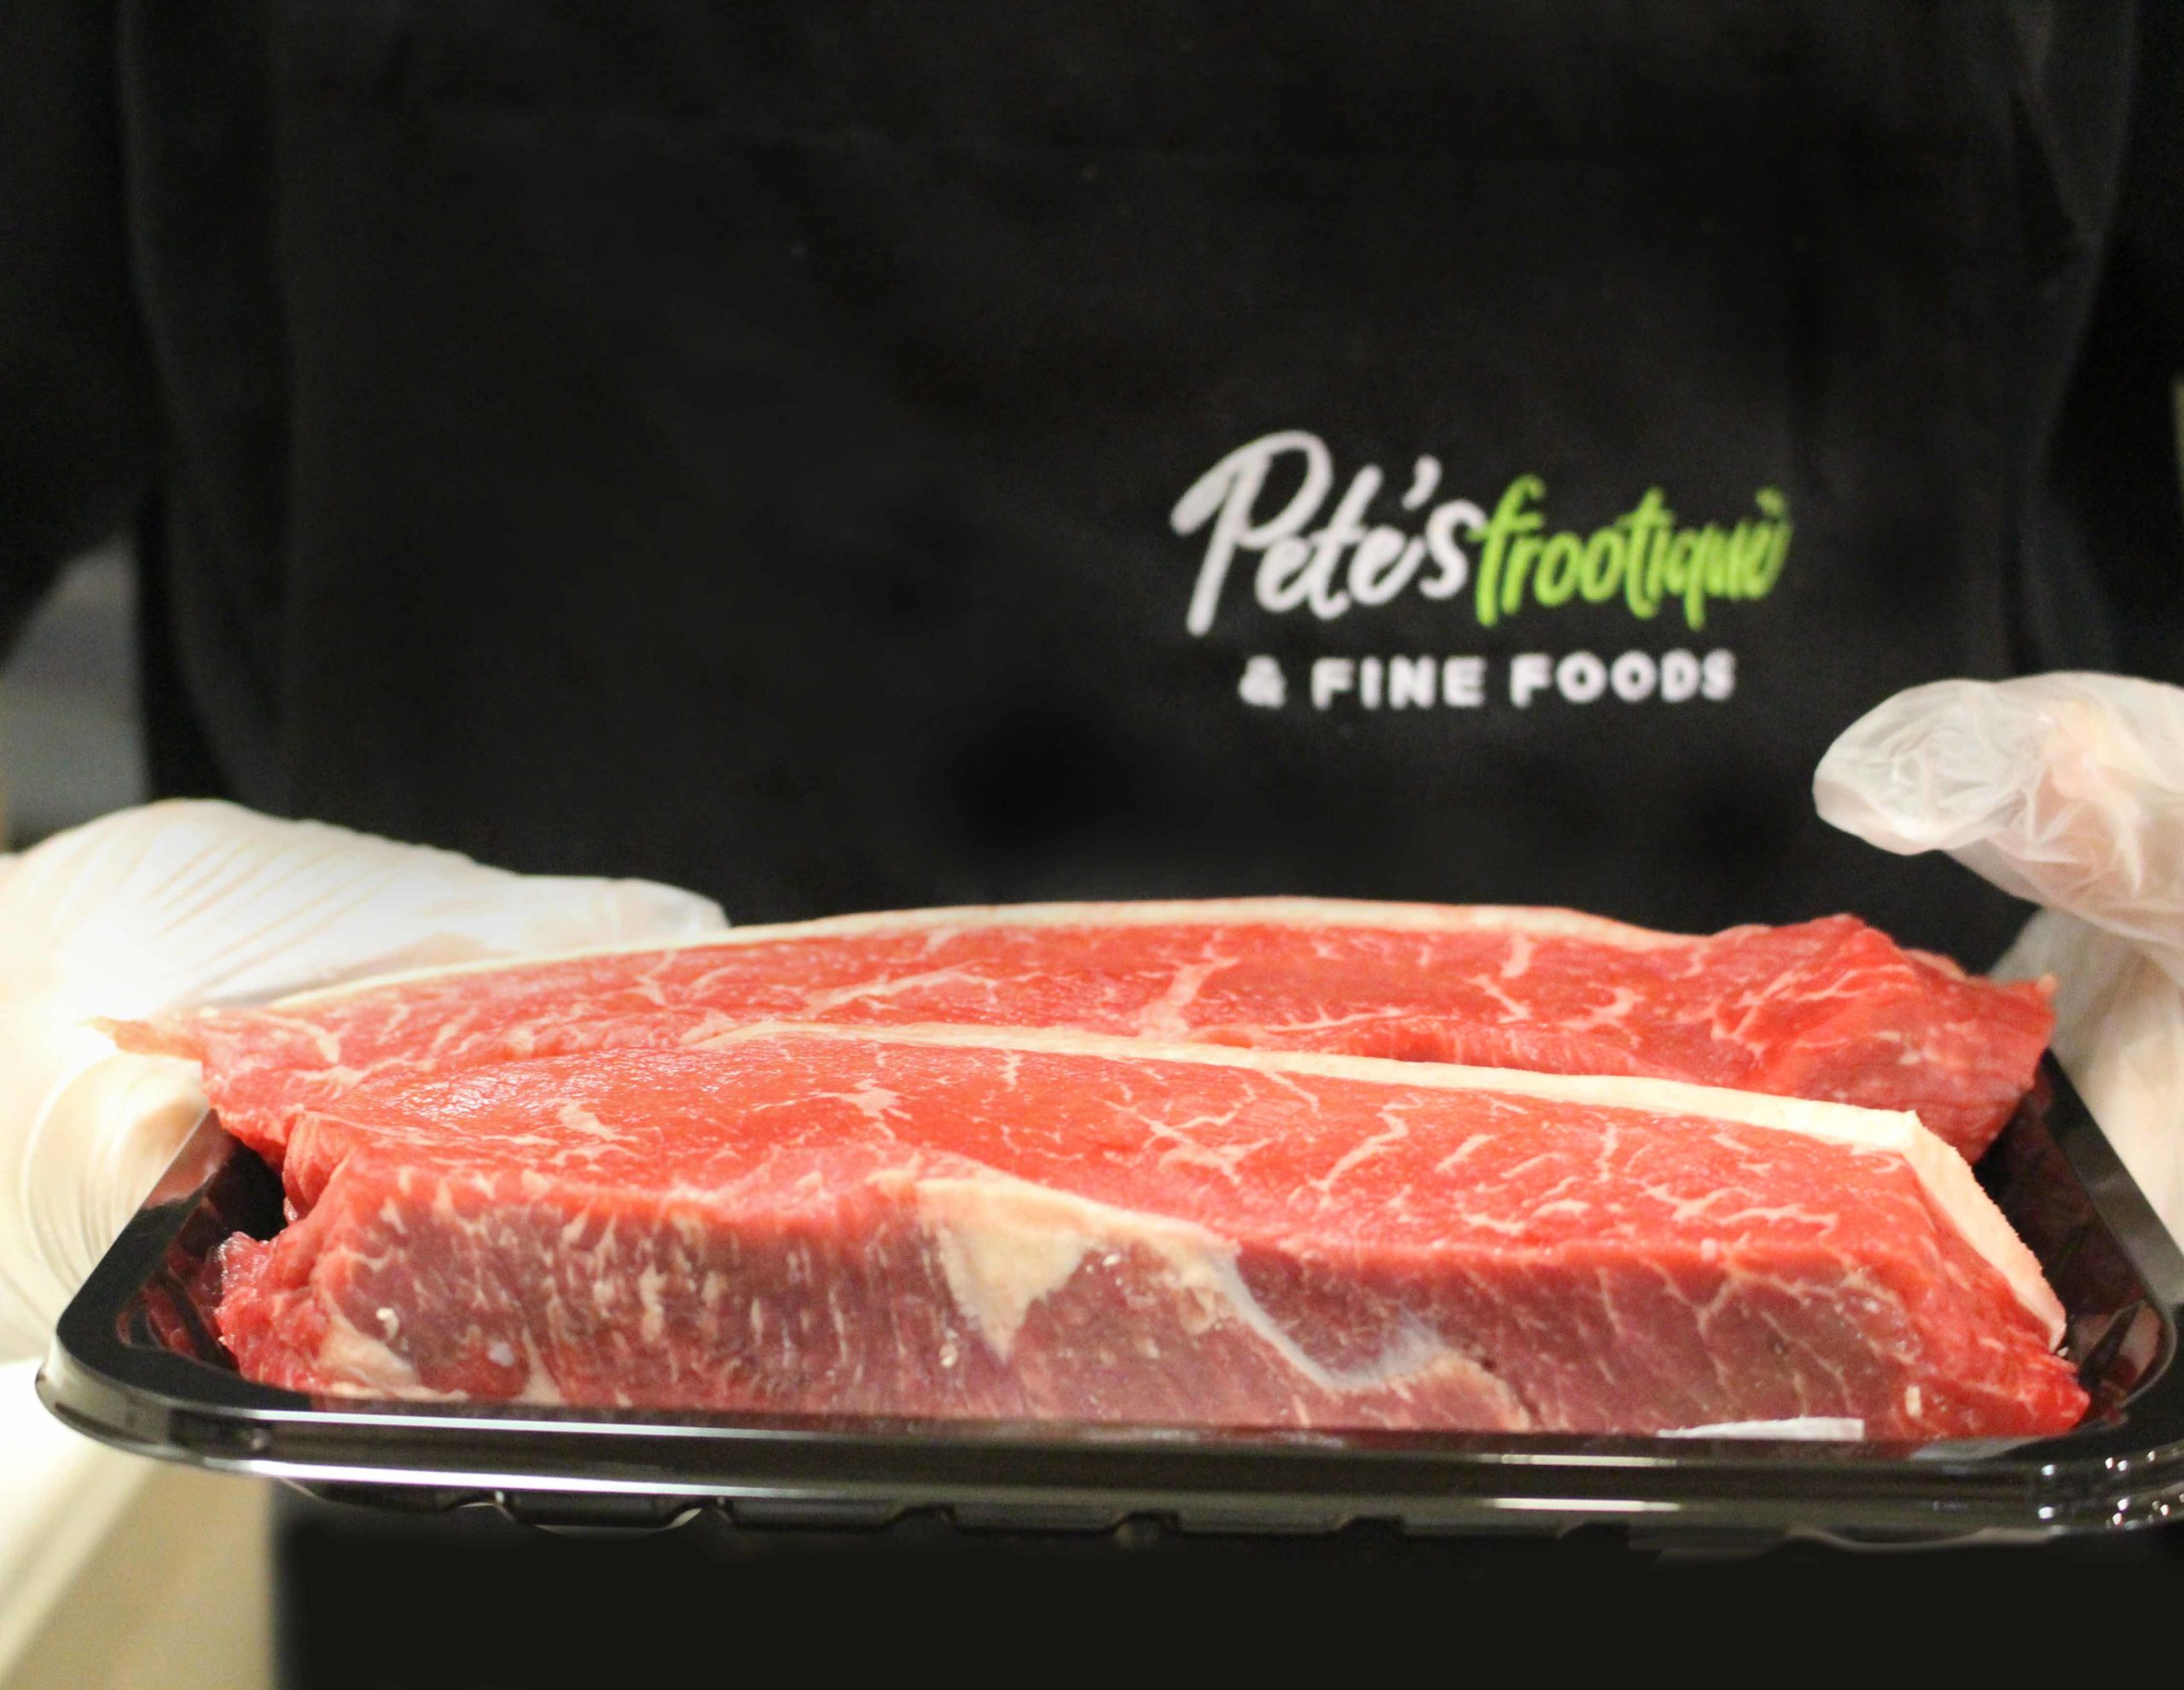 A person in a Pete's Frootique uniform holds a package of beef in front of the camera.